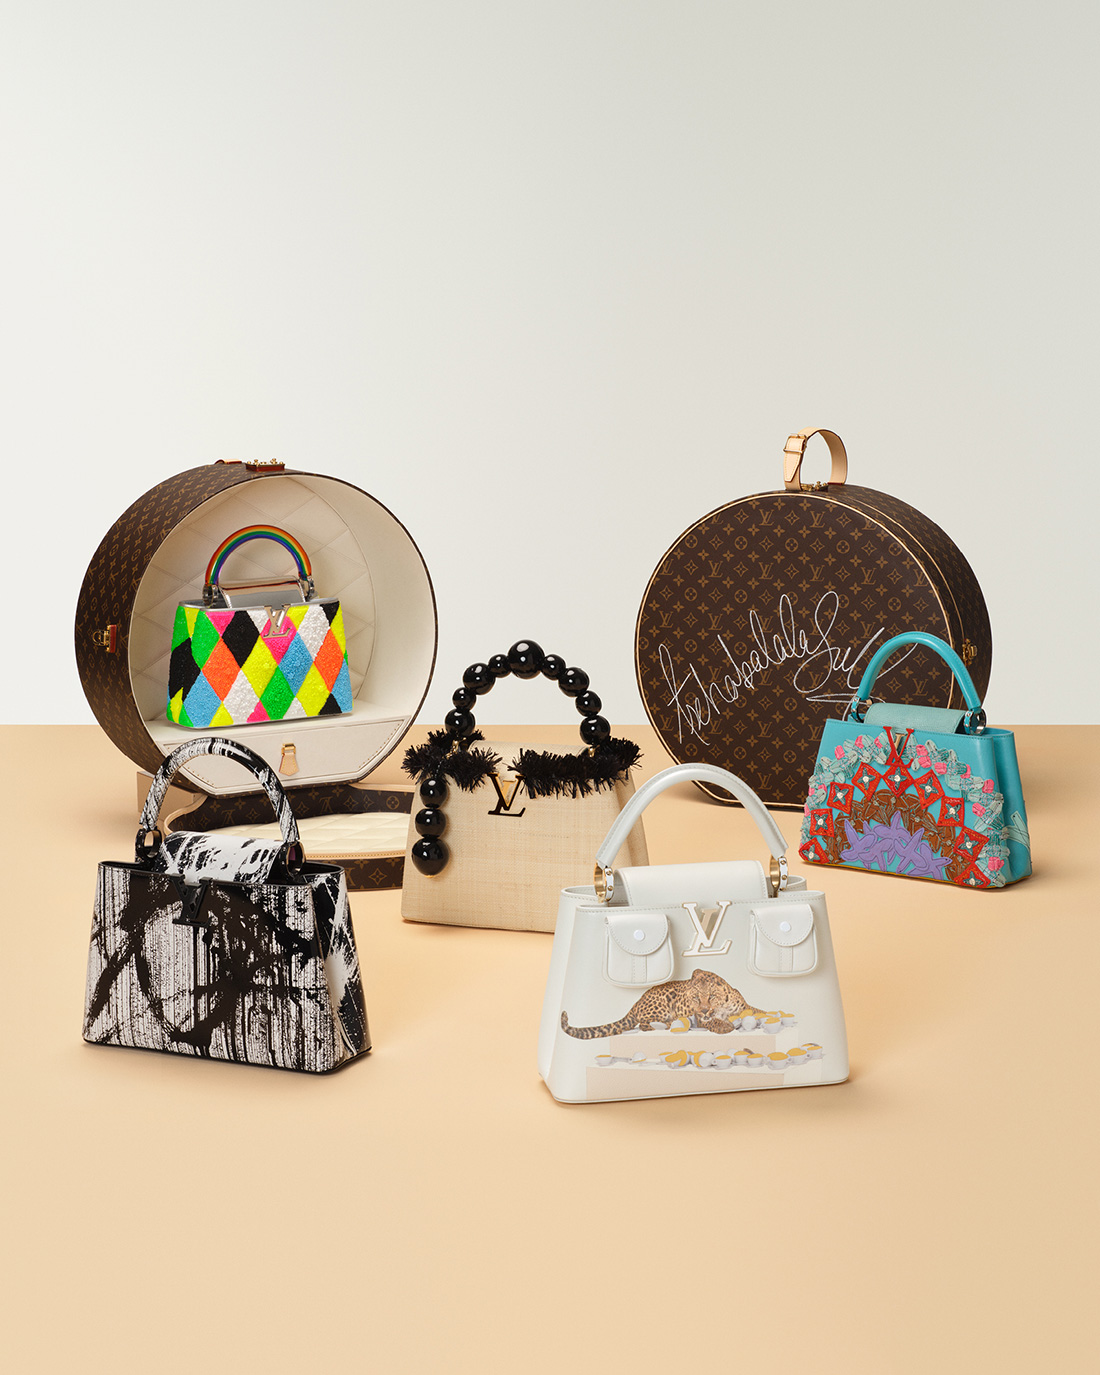 Louis Vuitton Artycapucines Bags Go For Charity